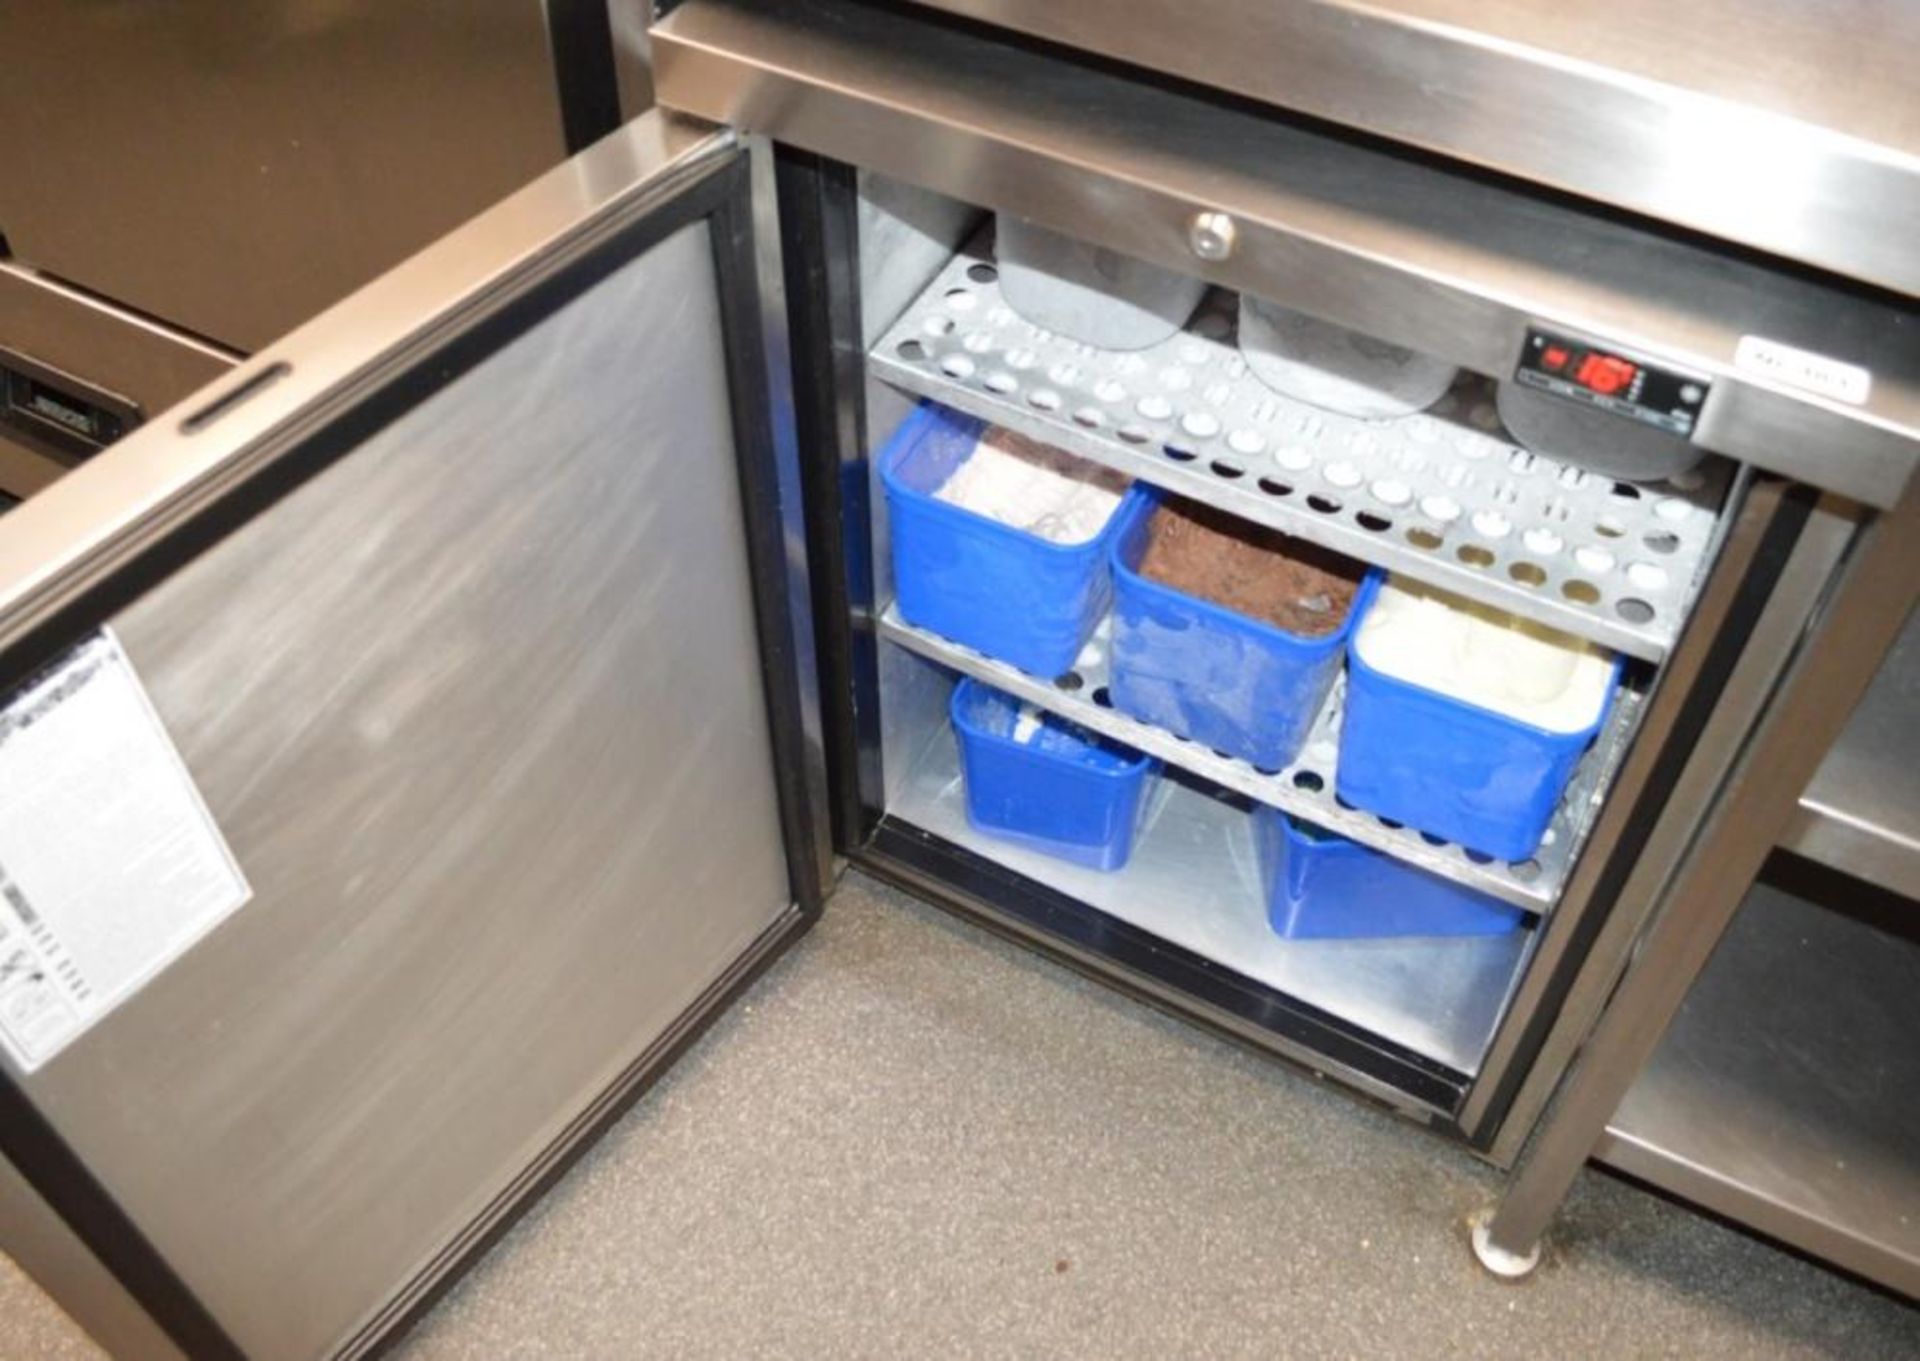 1 x Foster Undercounter Single Door Freezer With Stainless Steel Finish - Model LR150-A - H80 x - Image 3 of 3